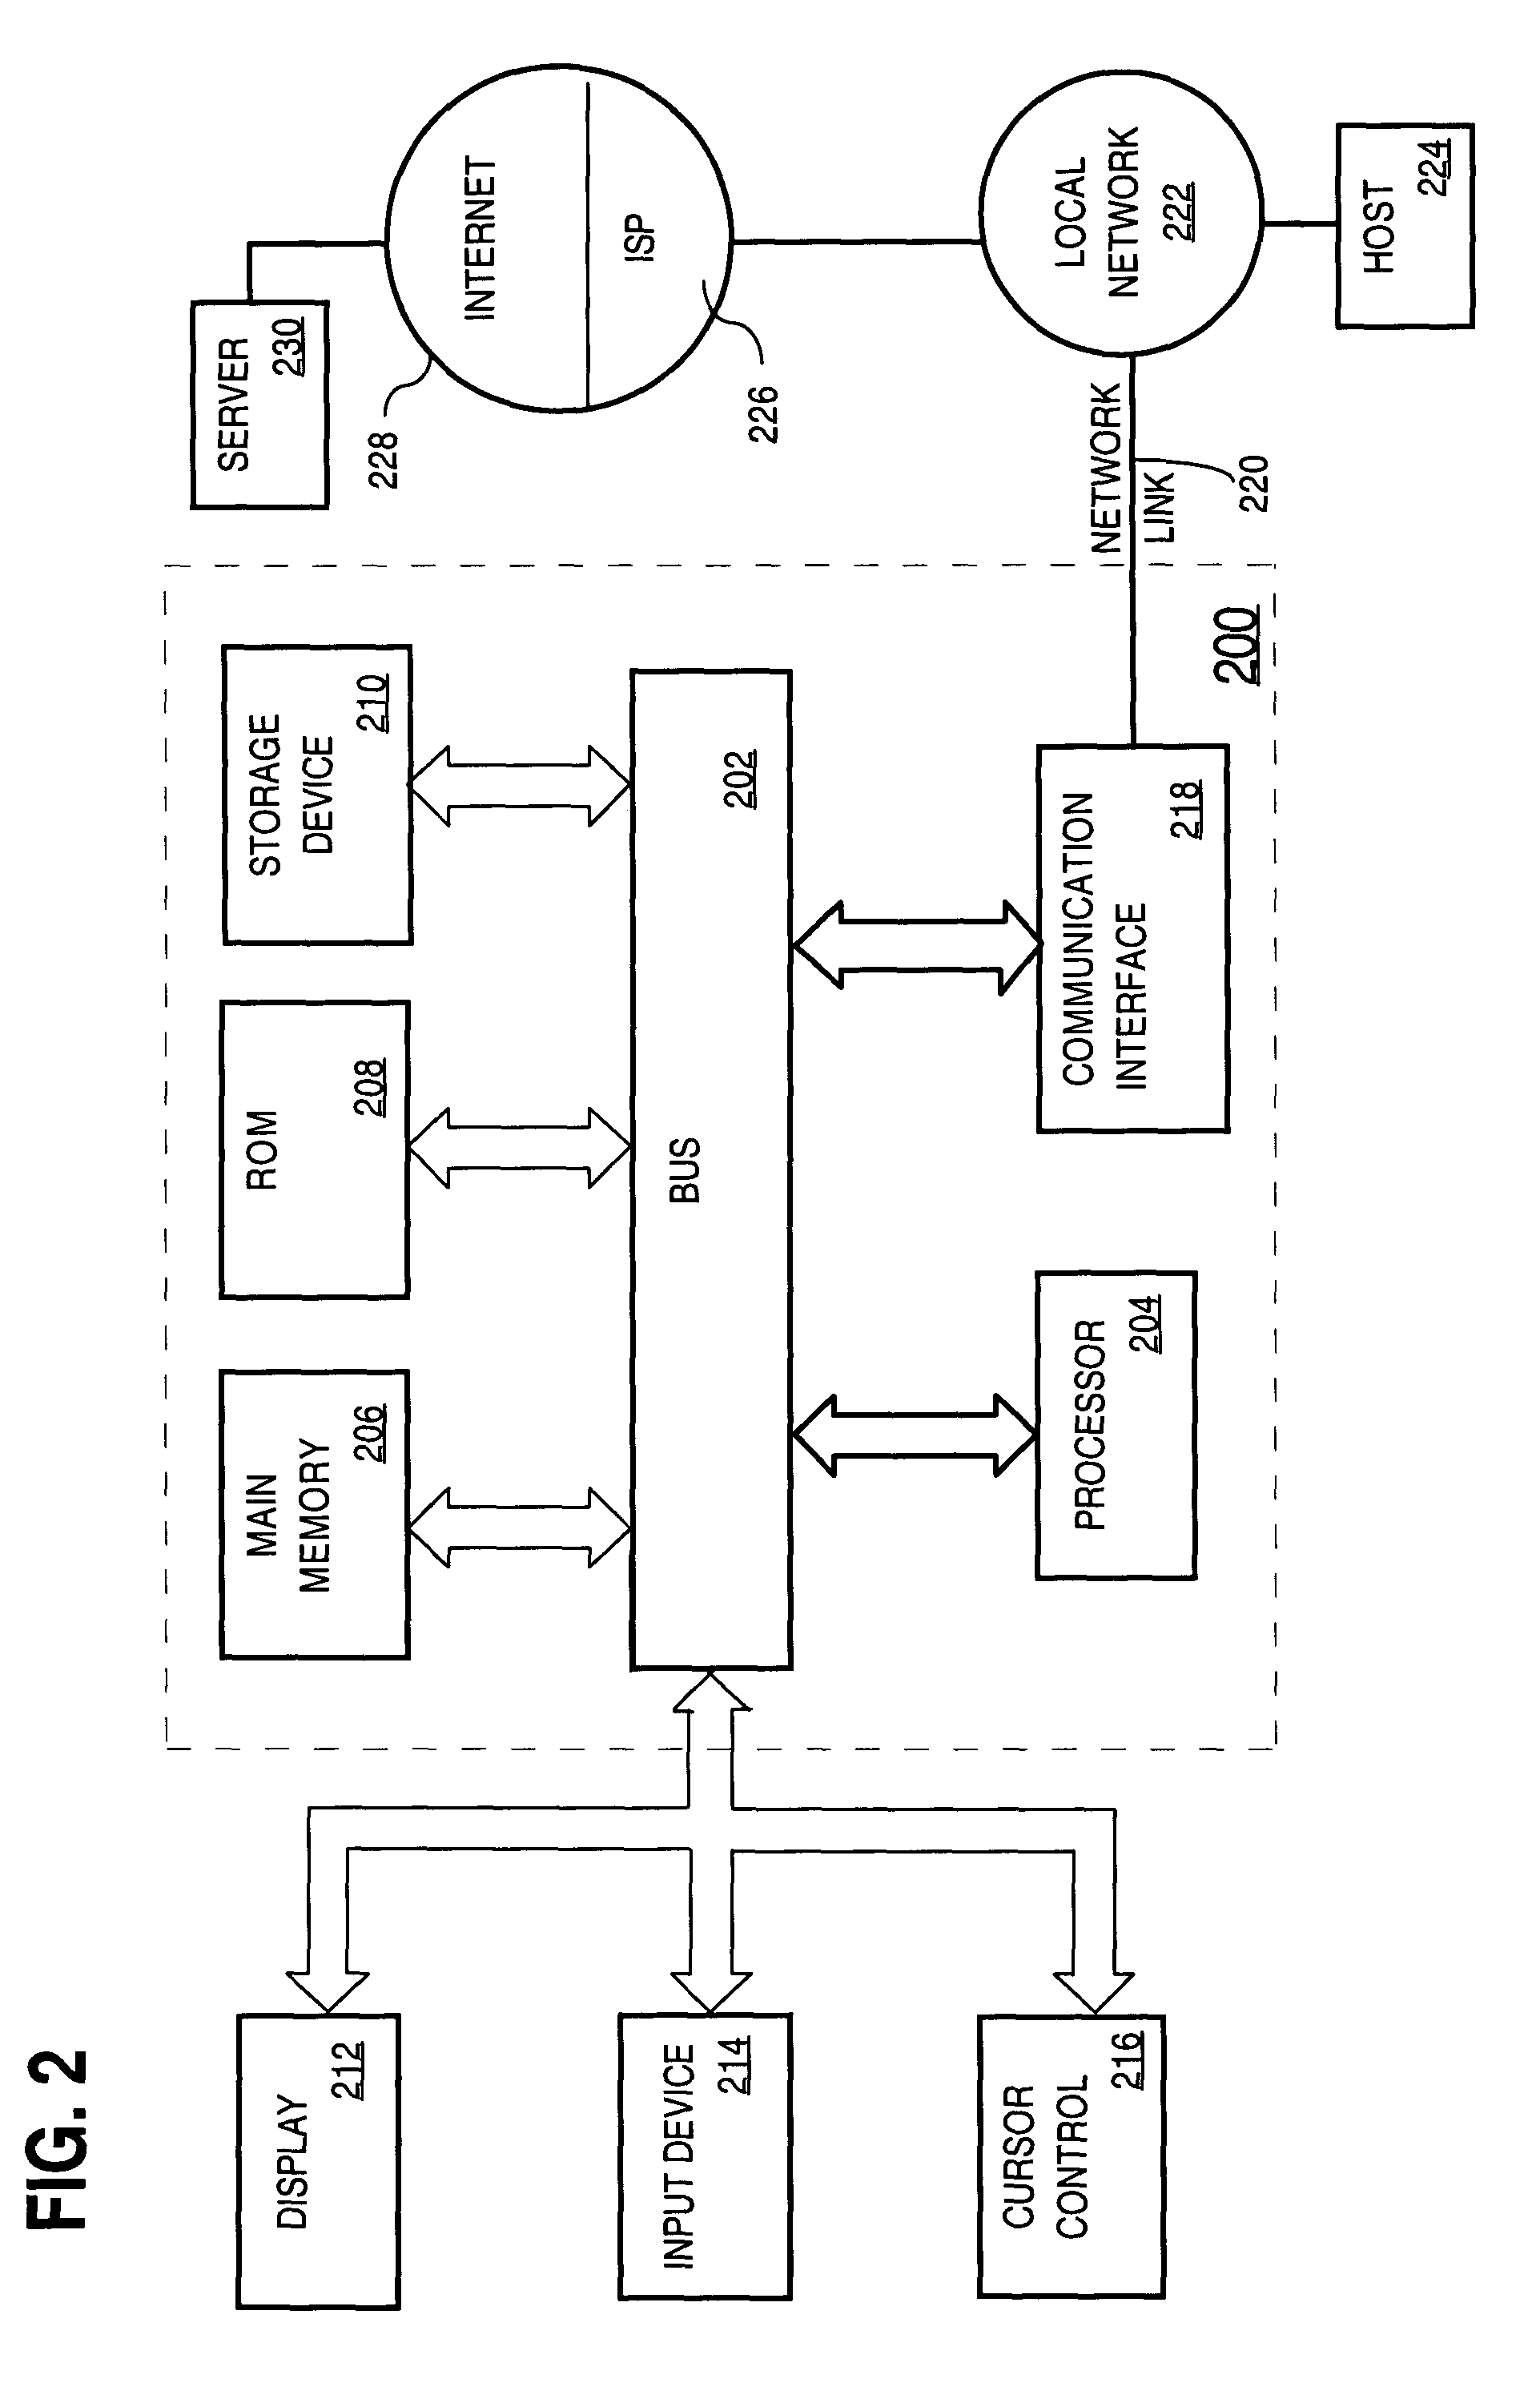 Method and apparatus for making available data that was locked by a dead transaction before rolling back the entire dead transaction